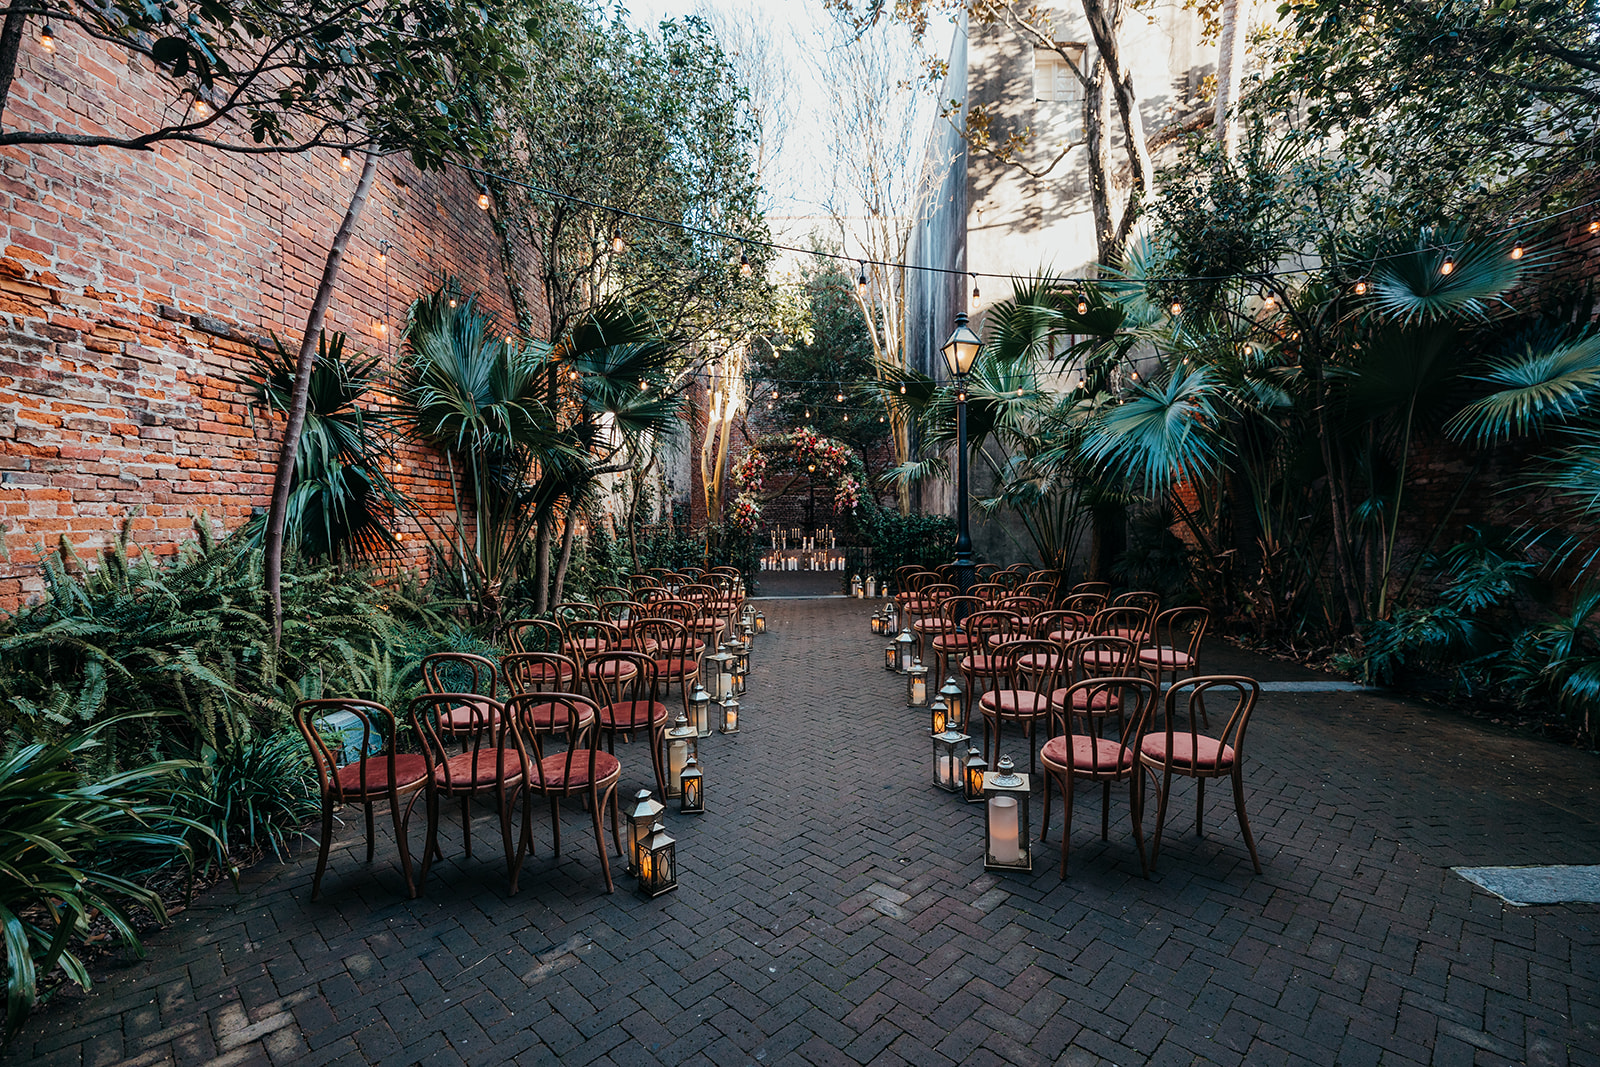 Decoration and florals for a wedding in the courtyard of the New Orleans Pharmacy Museum